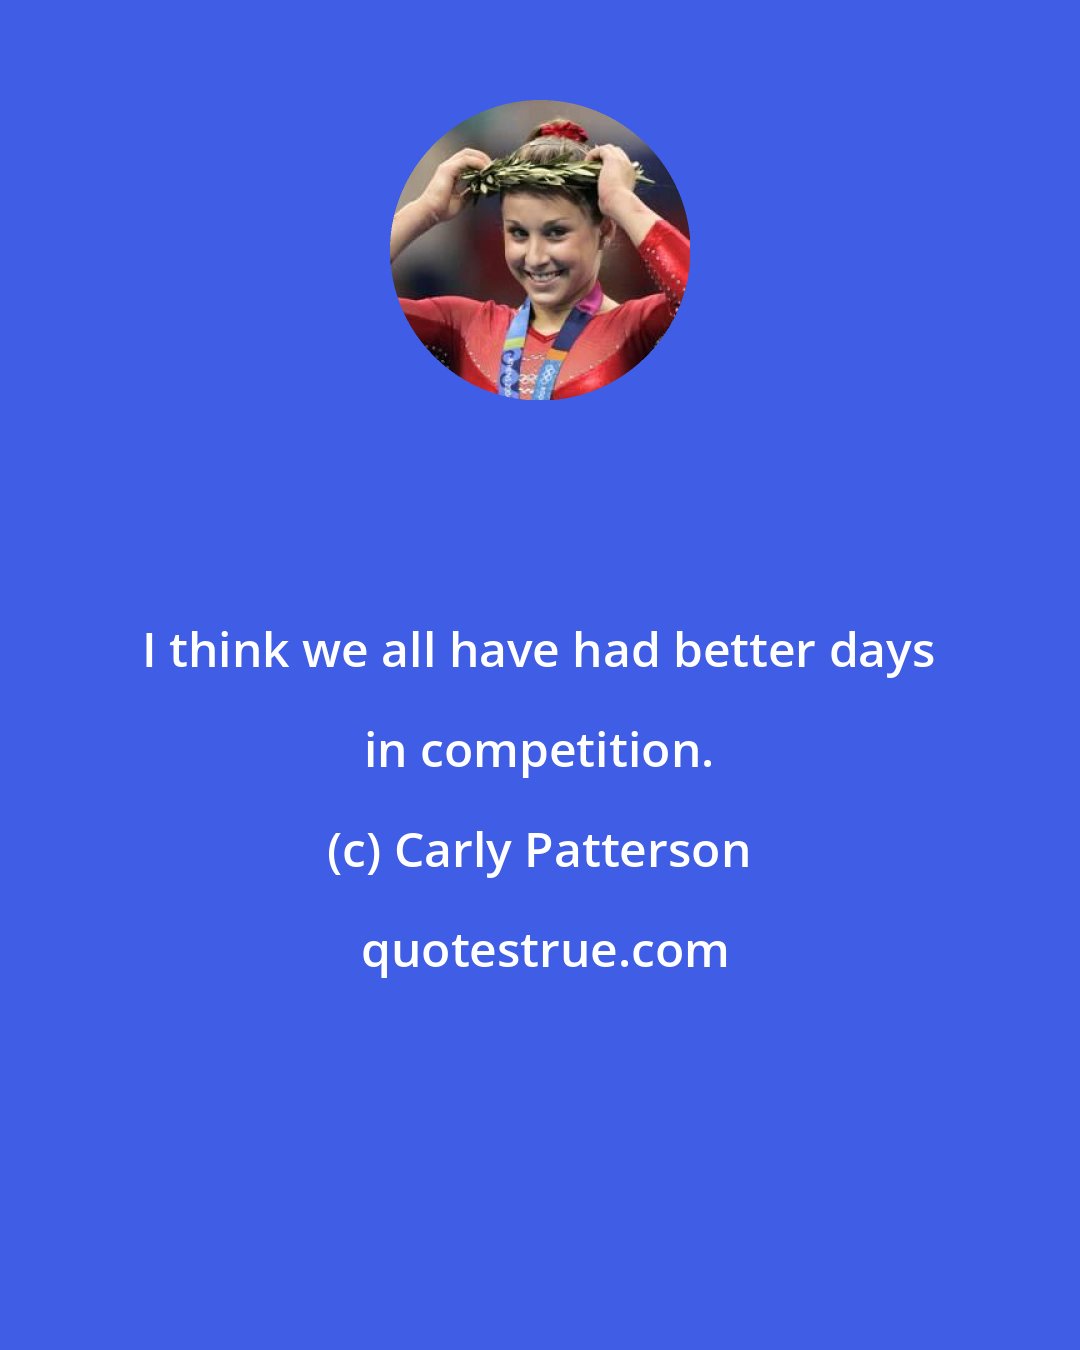 Carly Patterson: I think we all have had better days in competition.